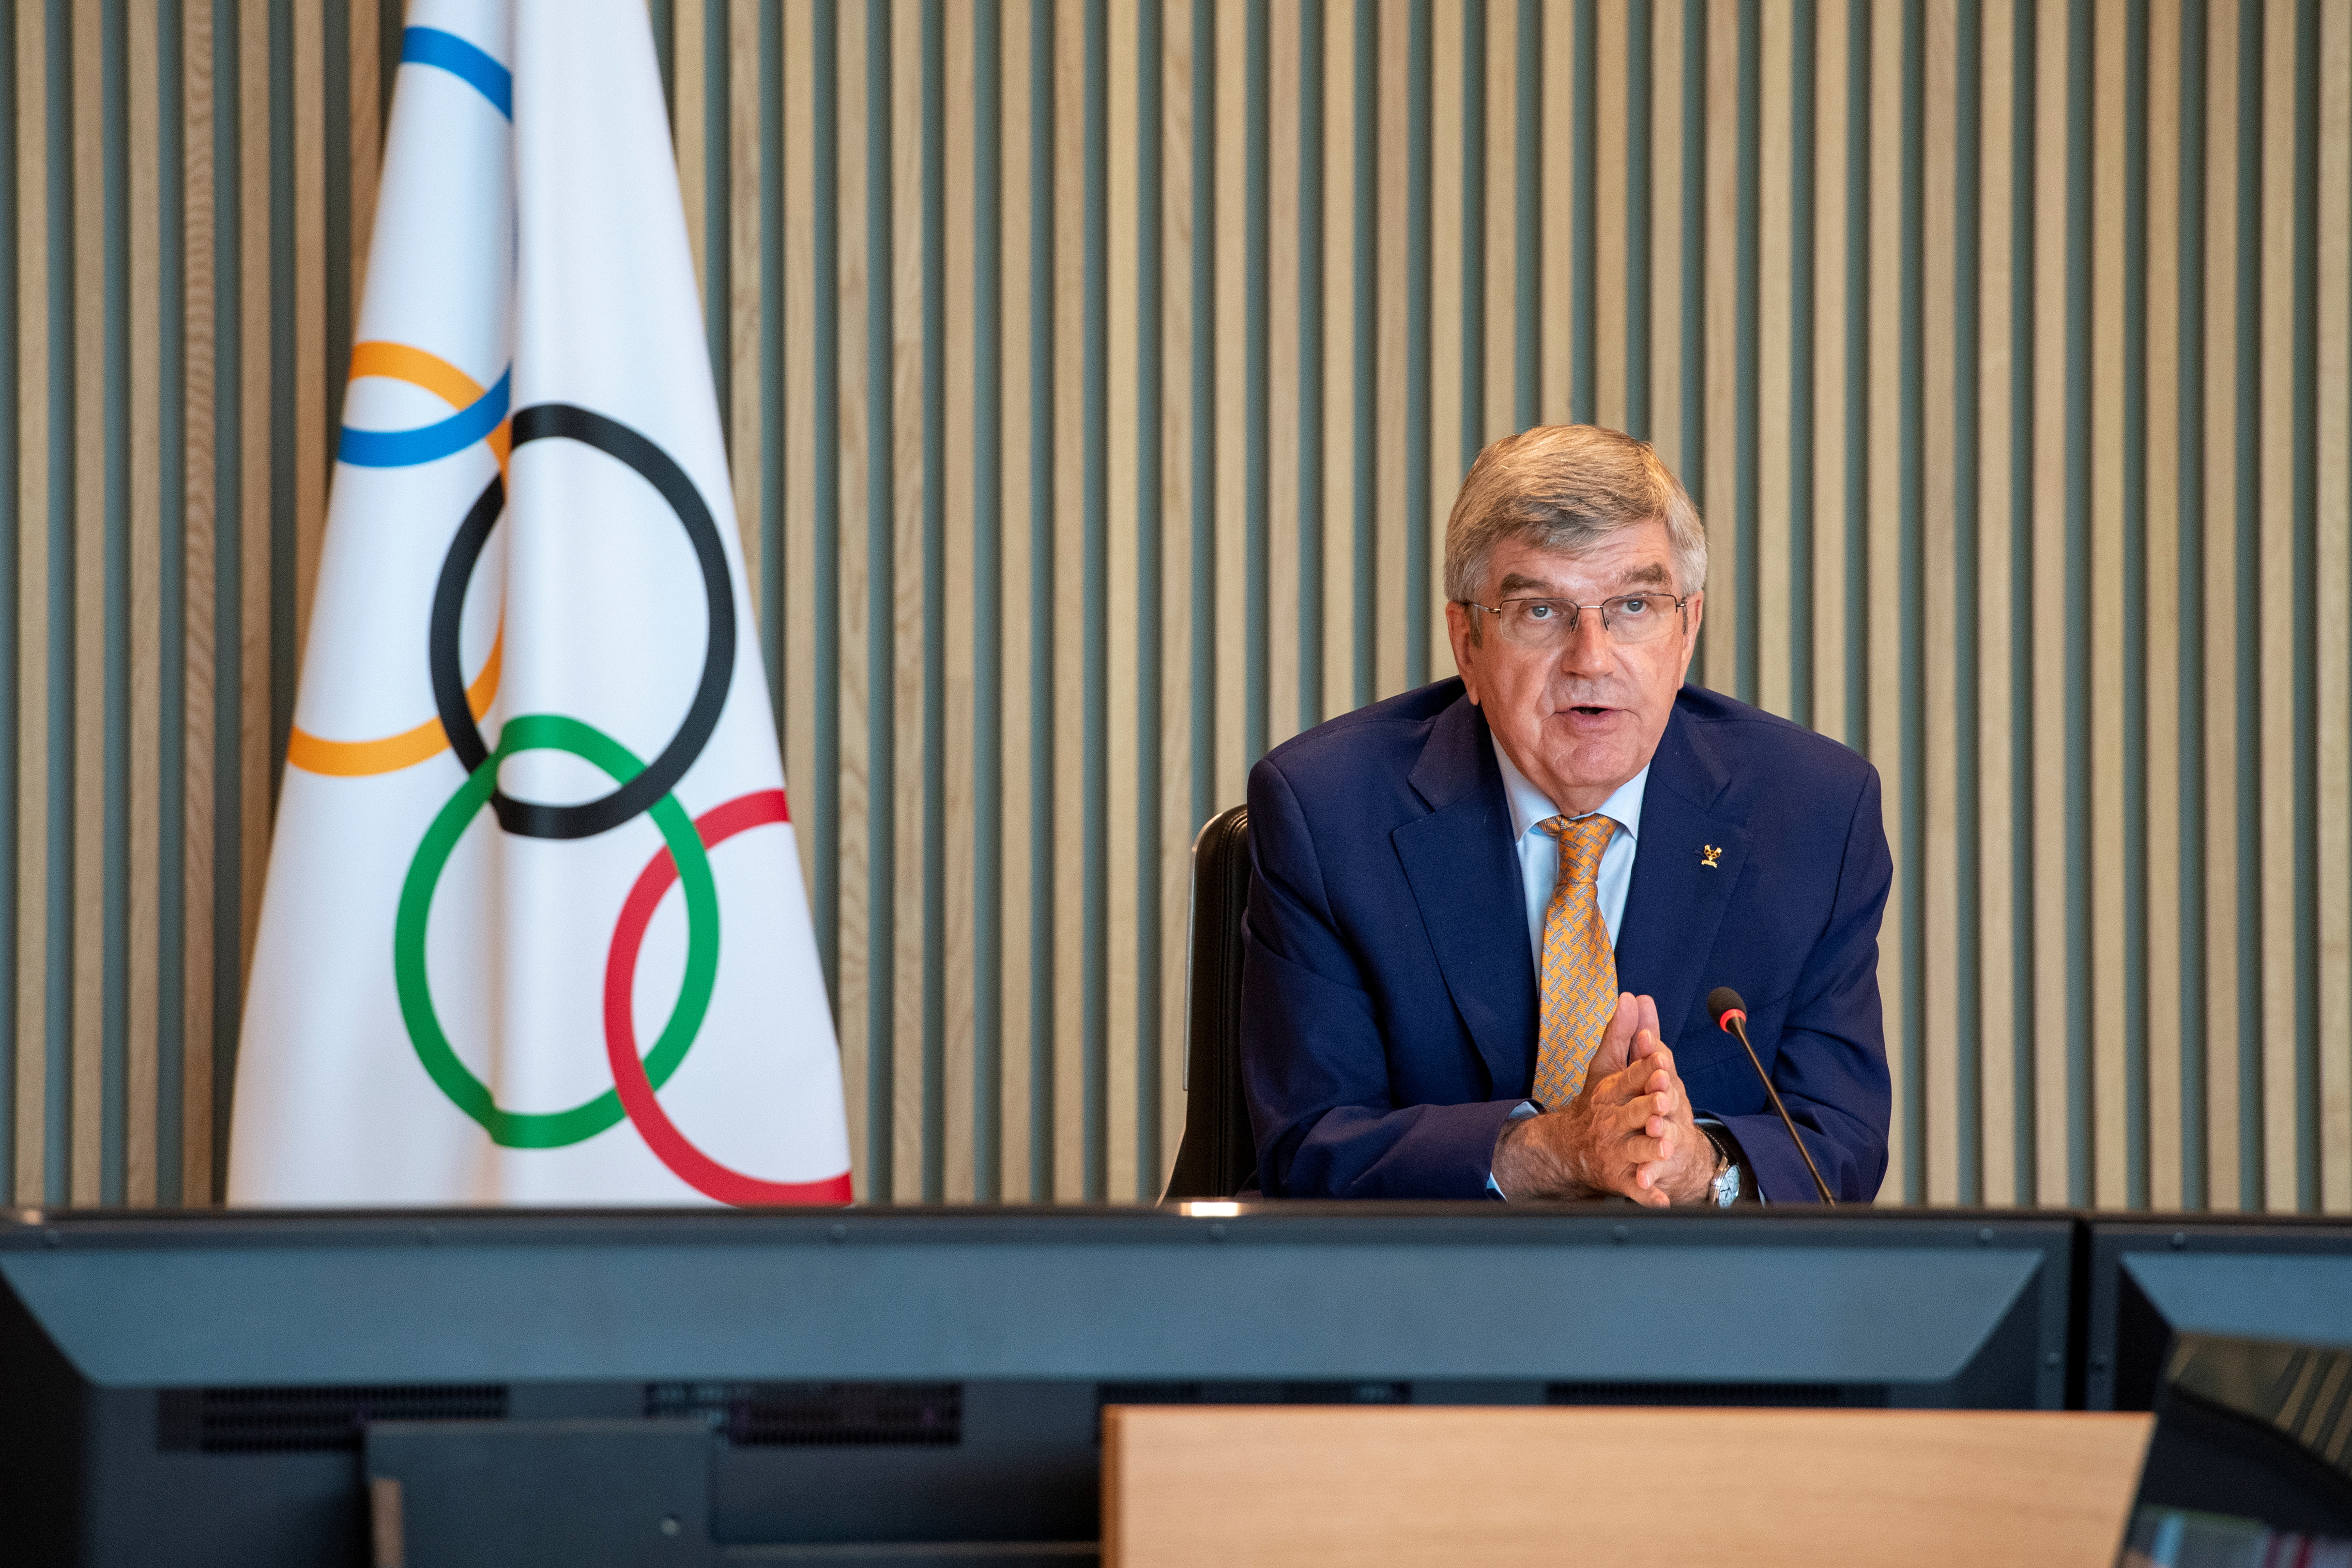 International Olympic Committee (IOC) President Thomas Bach attends the Executive Board virtual meeting at the Olympic House in Lausanne, Switzerland, September 8, 2021. Philippe Woods/IOC/Handout via REUTERS THIS IMAGE HAS BEEN SUPPLIED BY A THIRD PARTY. NO RESALES. NO ARCHIVES